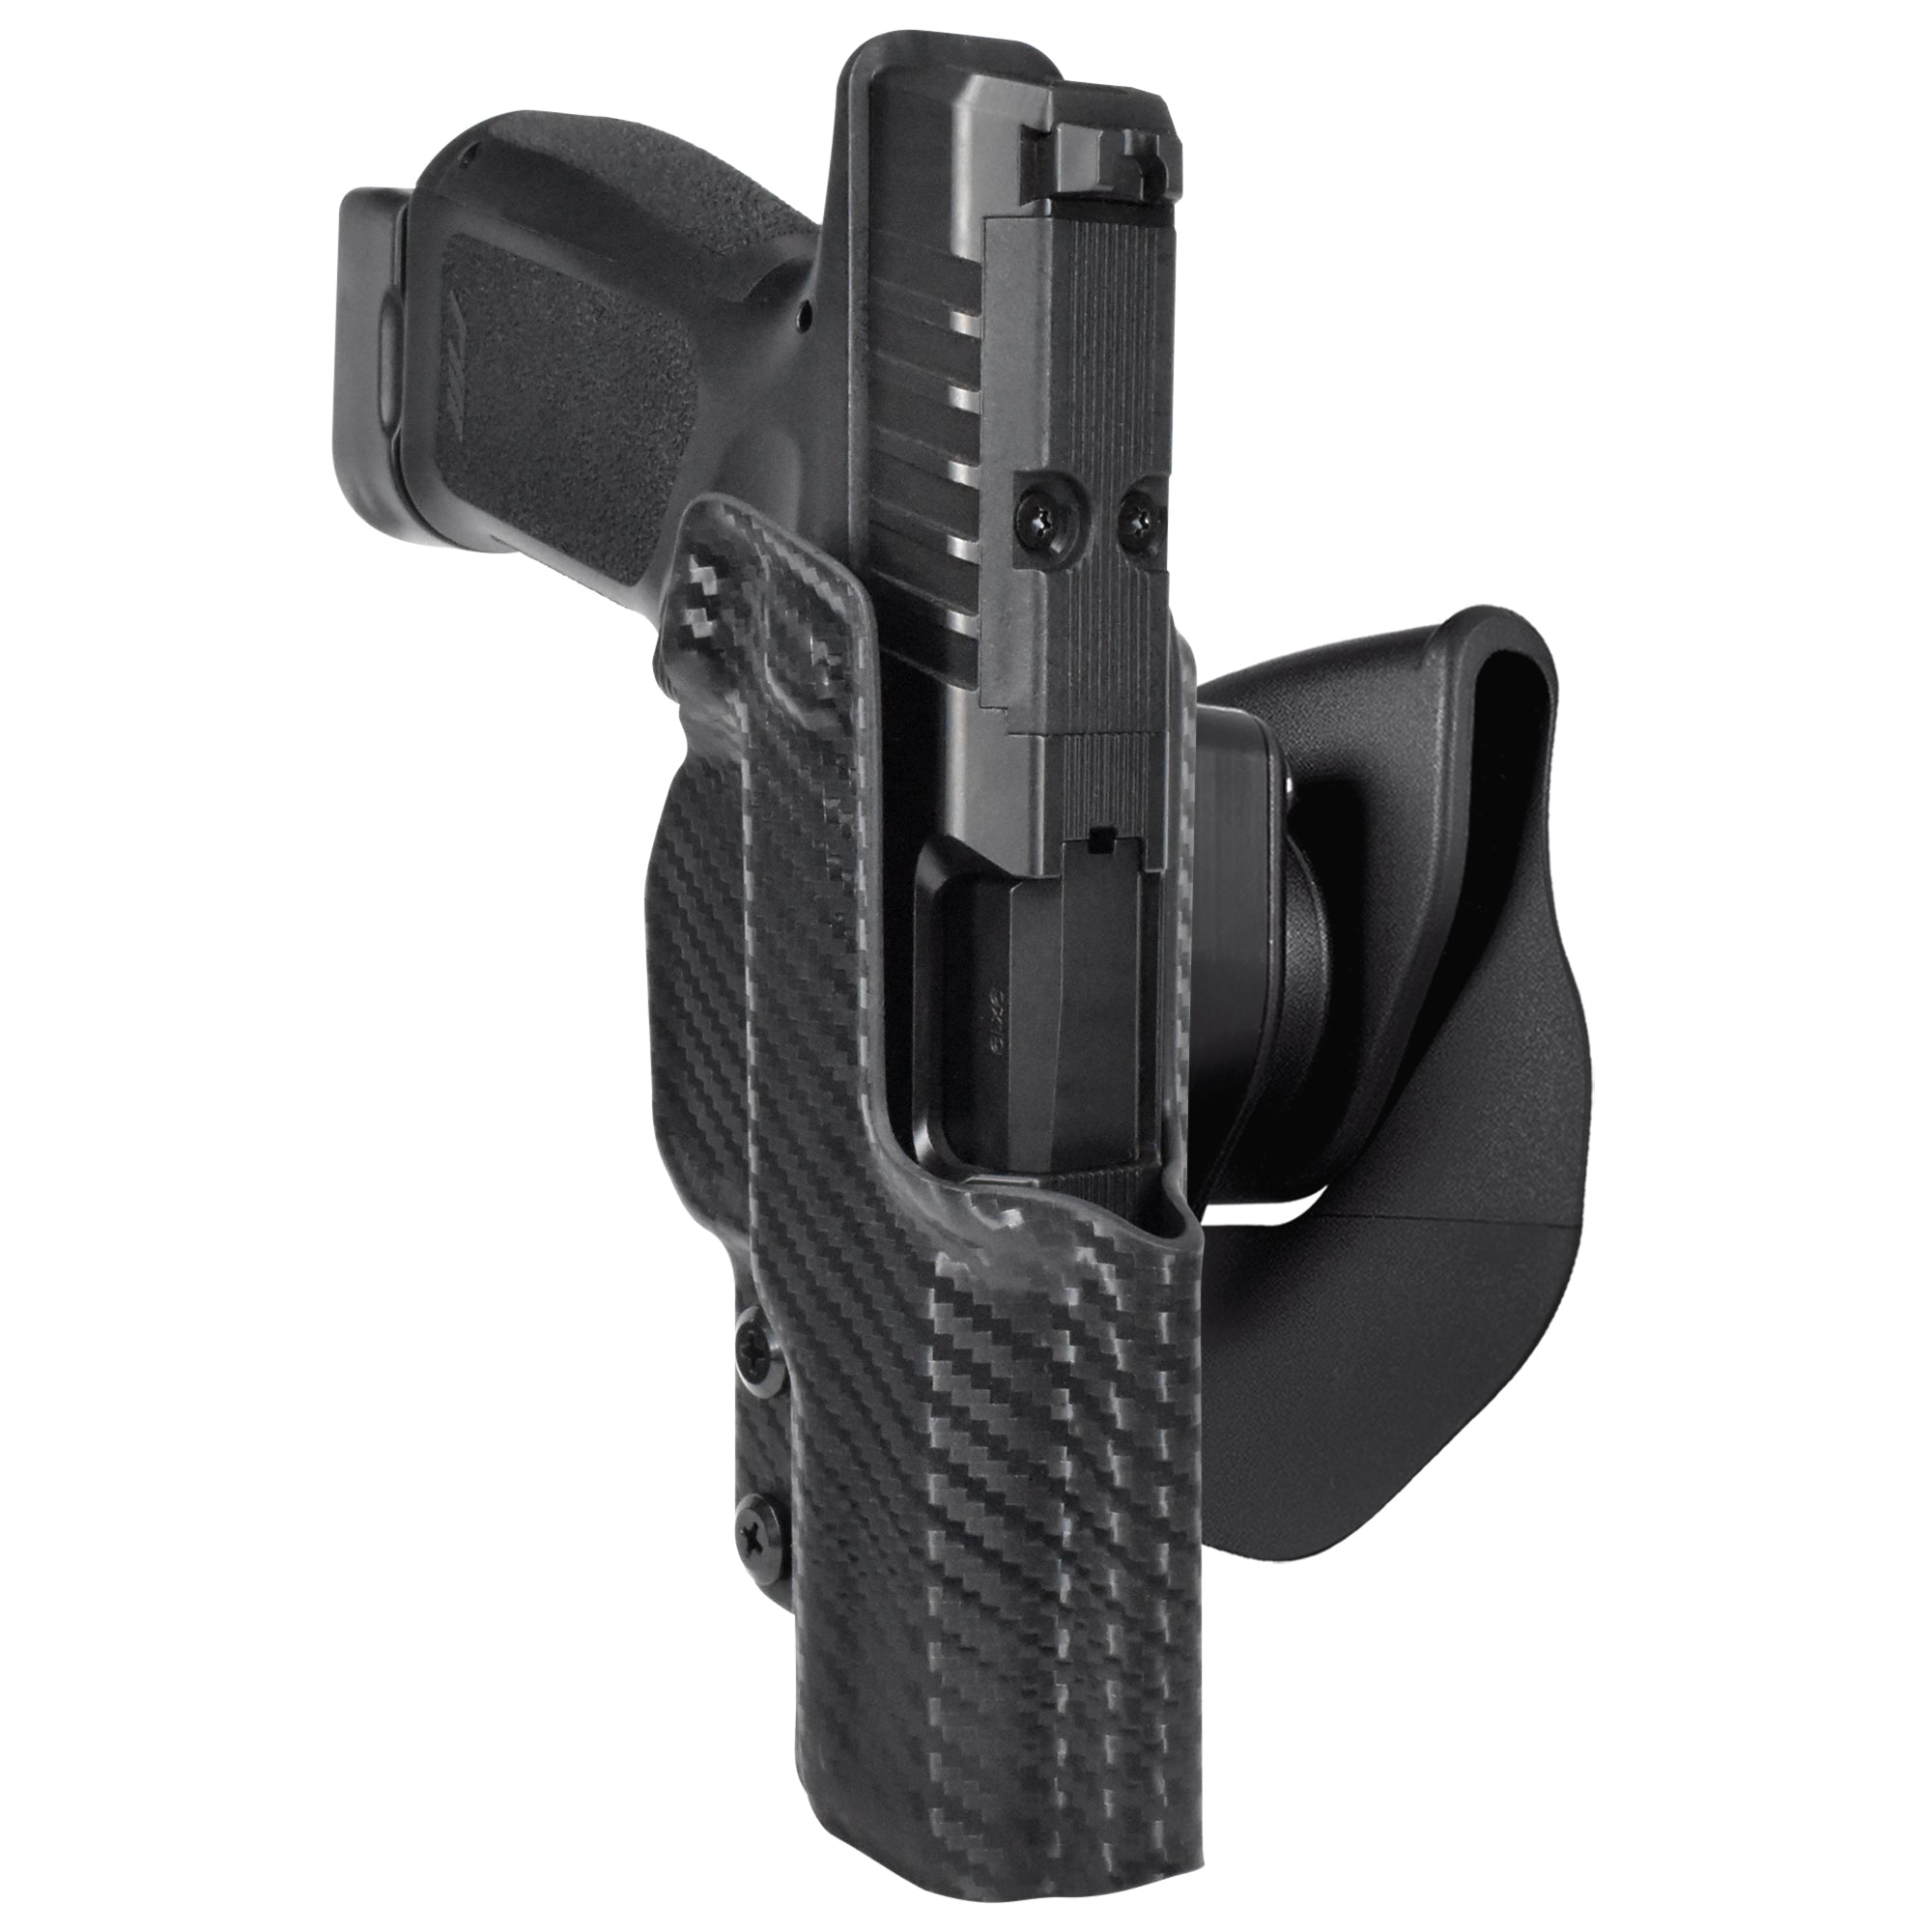 Rost Martin RM1C OWB Quick Release Paddle Holster in Carbon Fiber